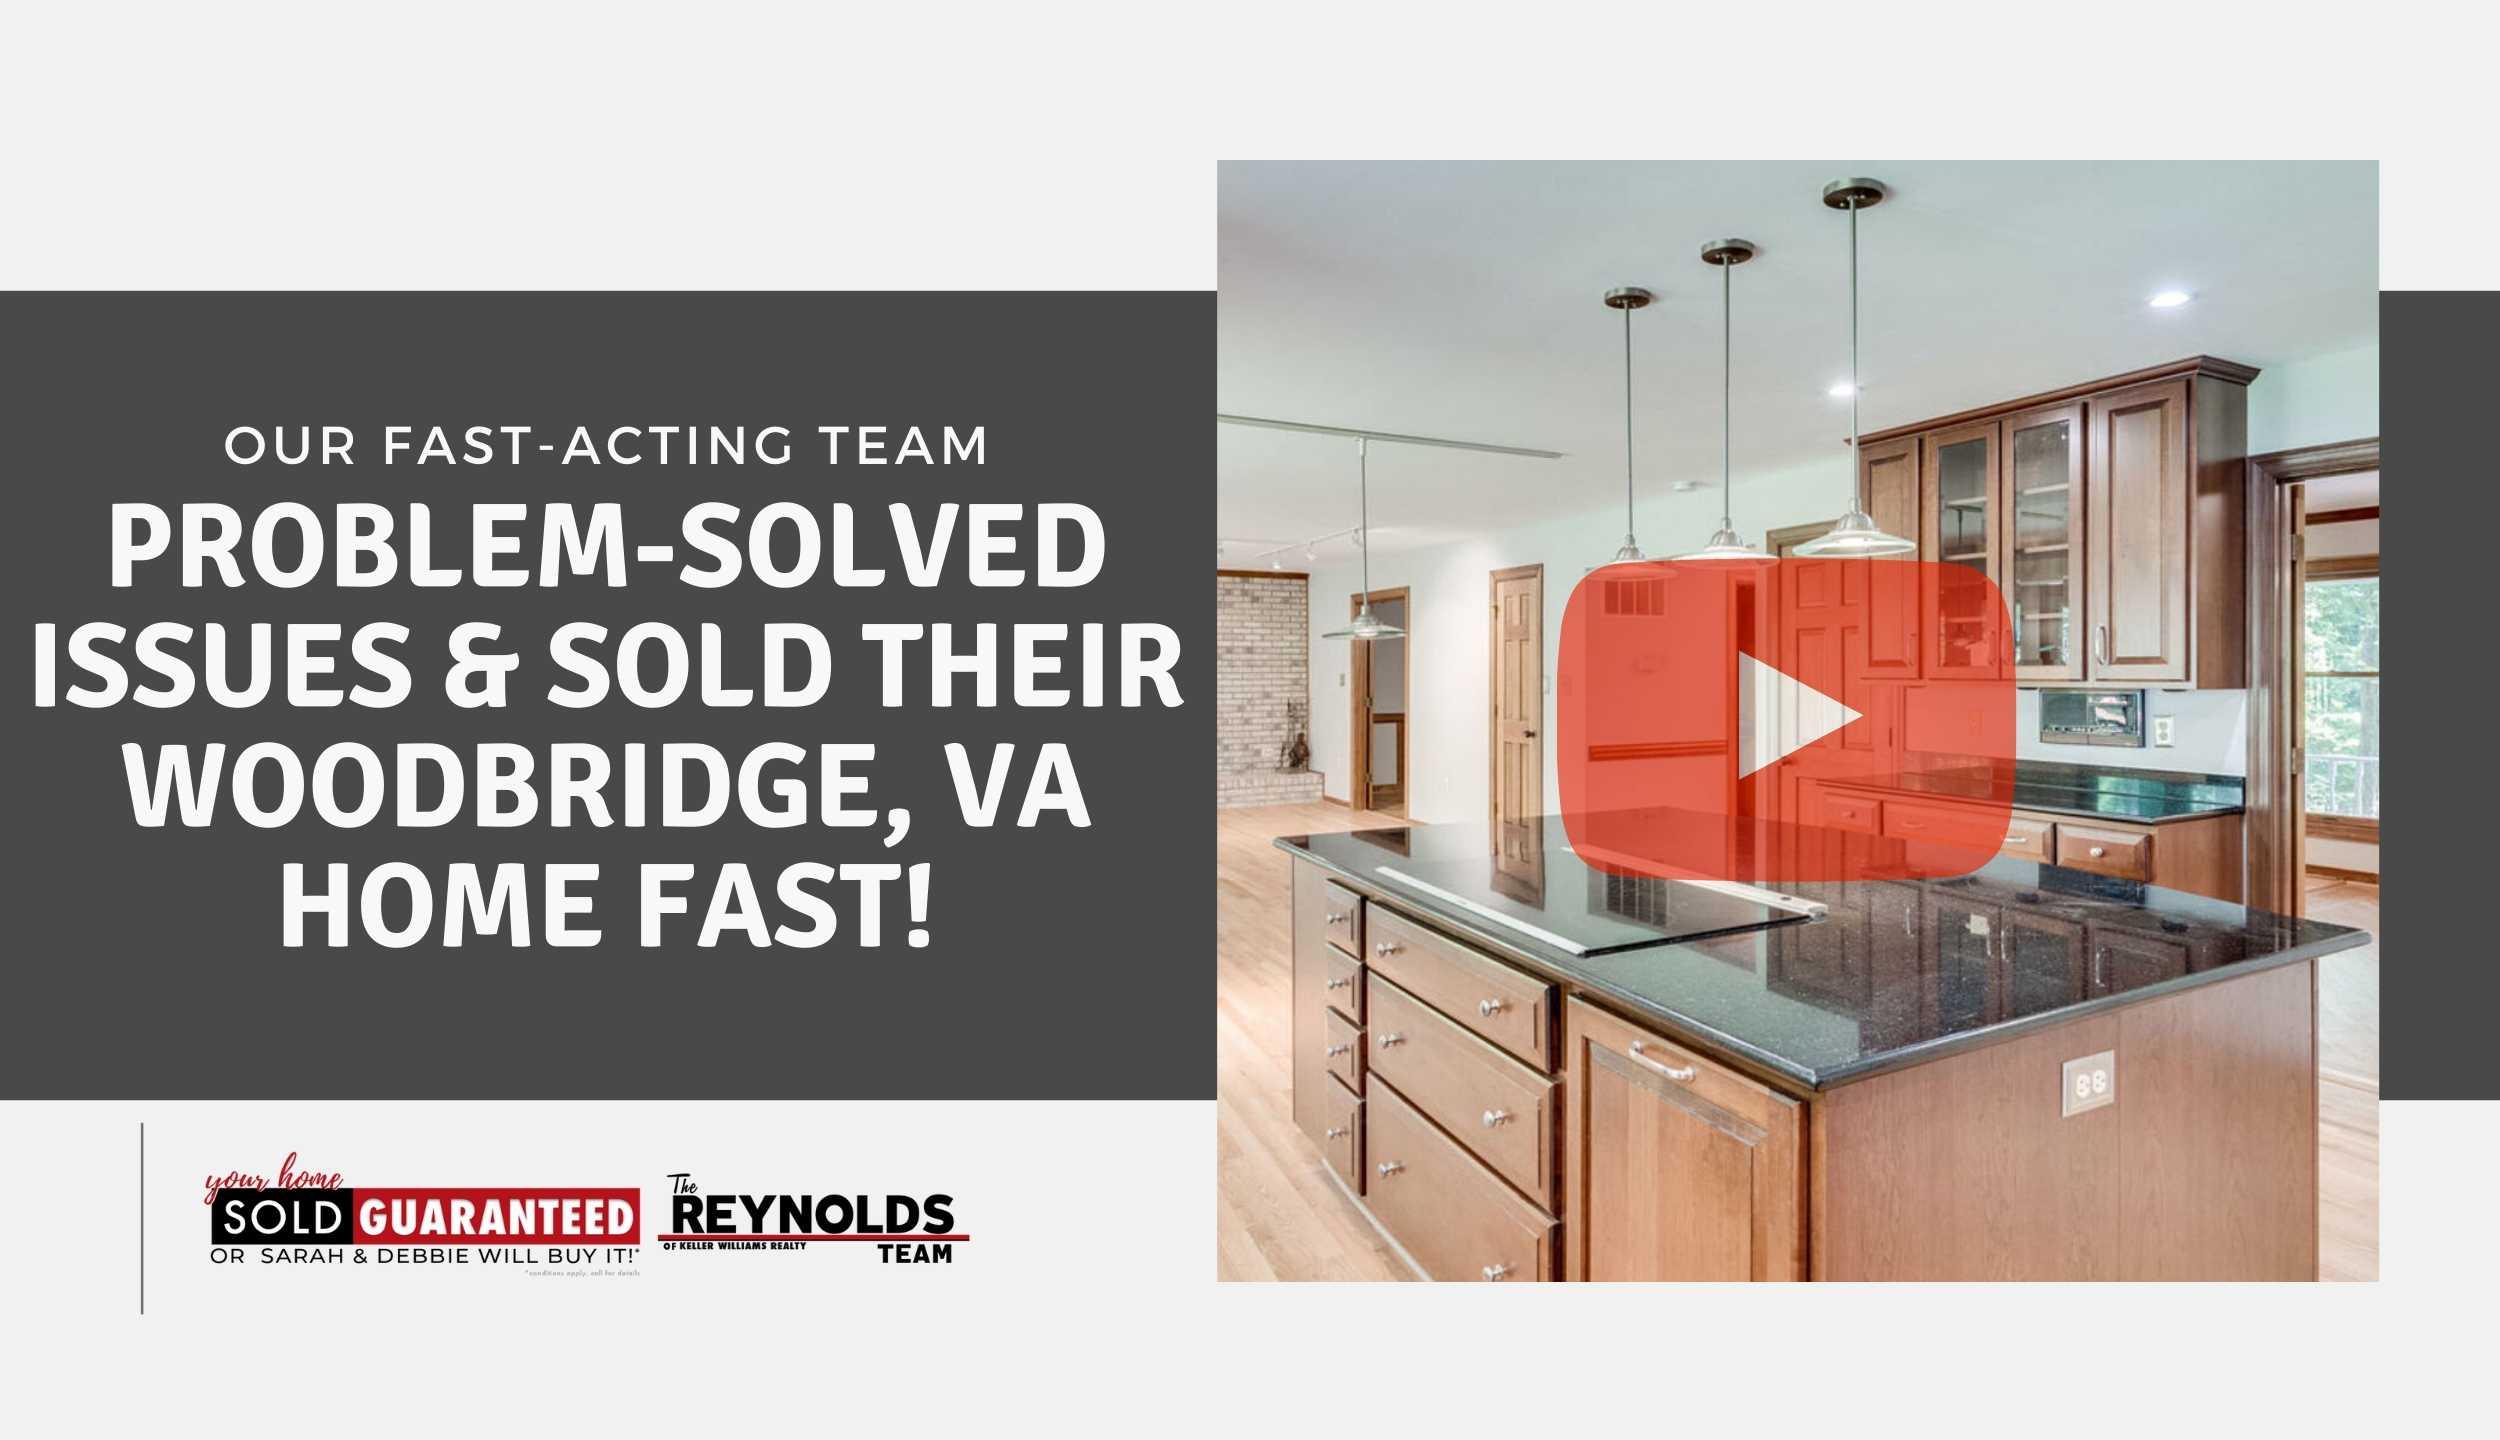 Our Fast-Acting Team Problem-Solved Issues & SOLD Their Woodbridge, VA Home FAST!